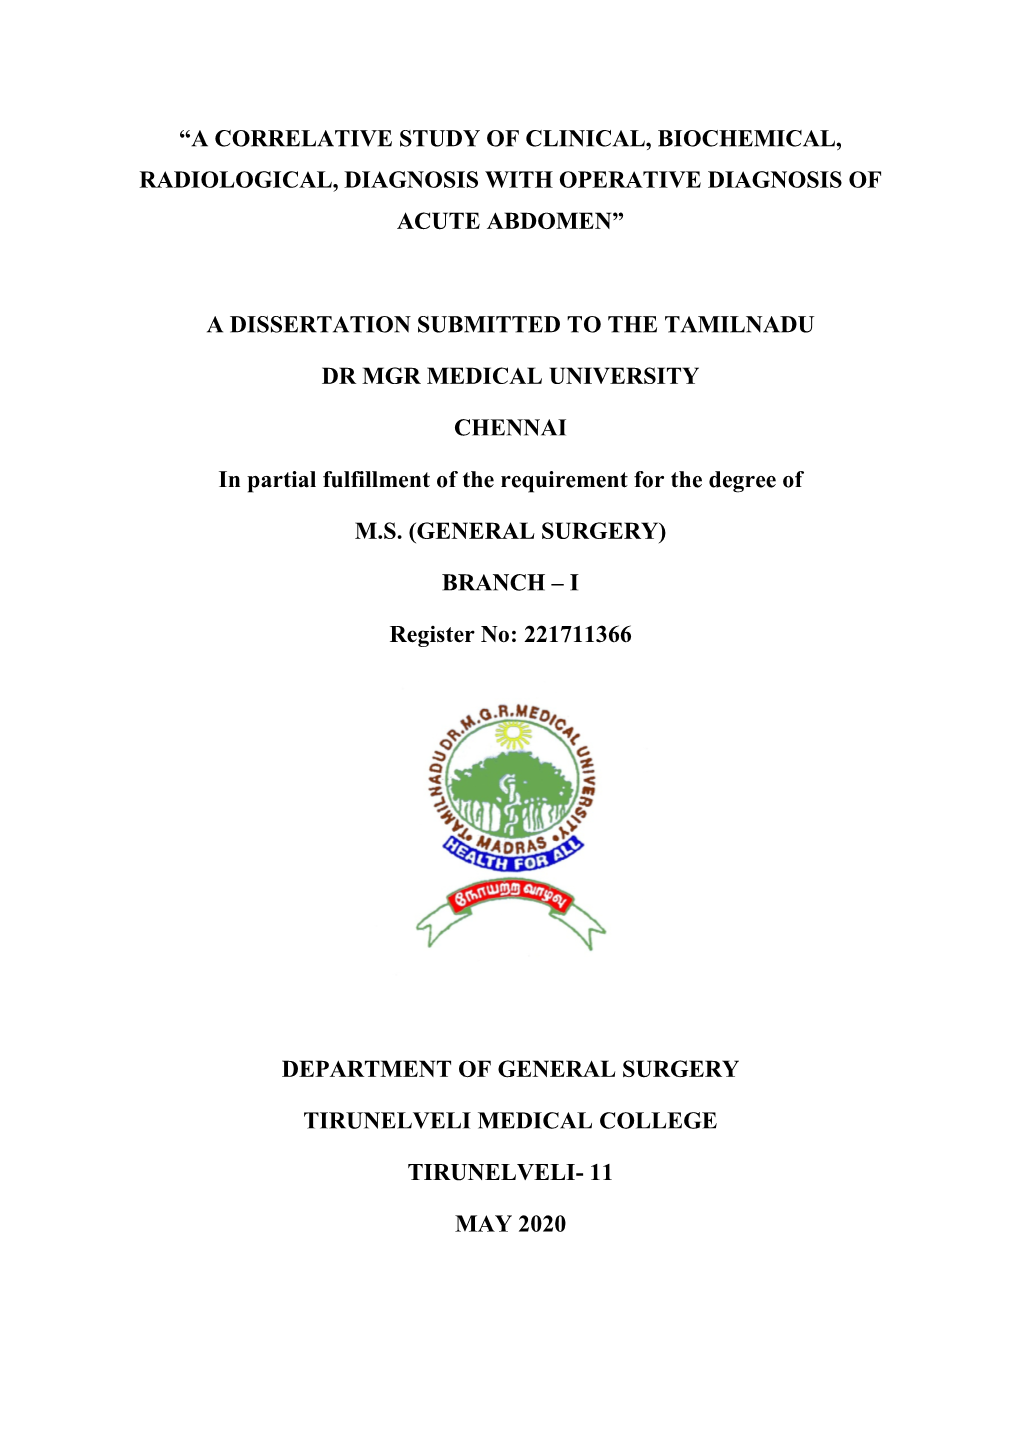 A Dissertation Submitted to the Tamilnadu